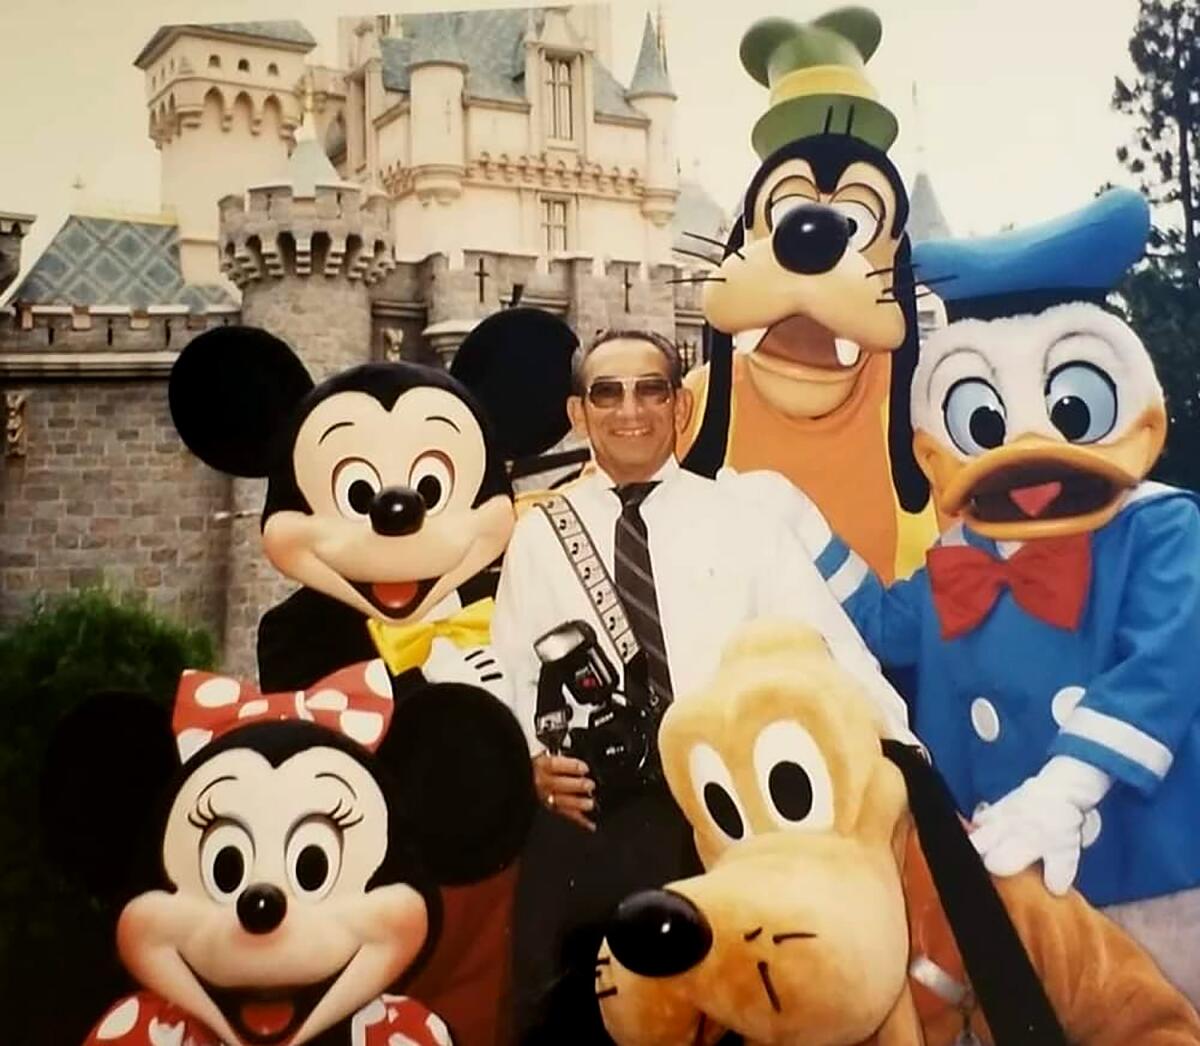 Renie Bardeau, camera strapped over a shoulder, poses with costumed characters at Disneyland.